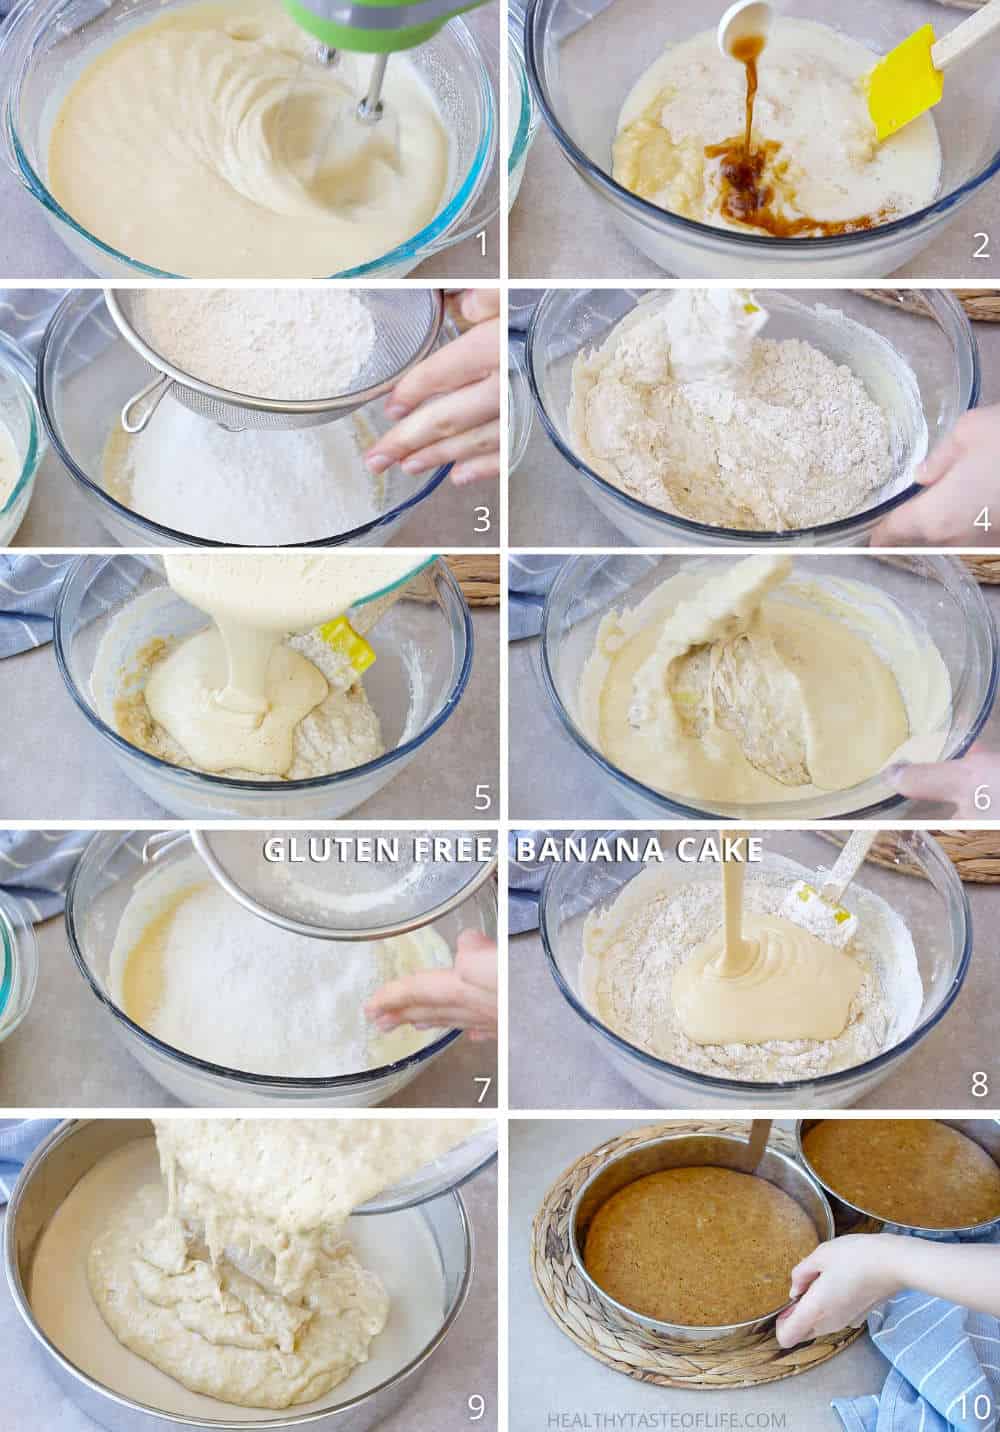 Instructions: How to make gluten free banana cake, how to make the batter and how to bake.